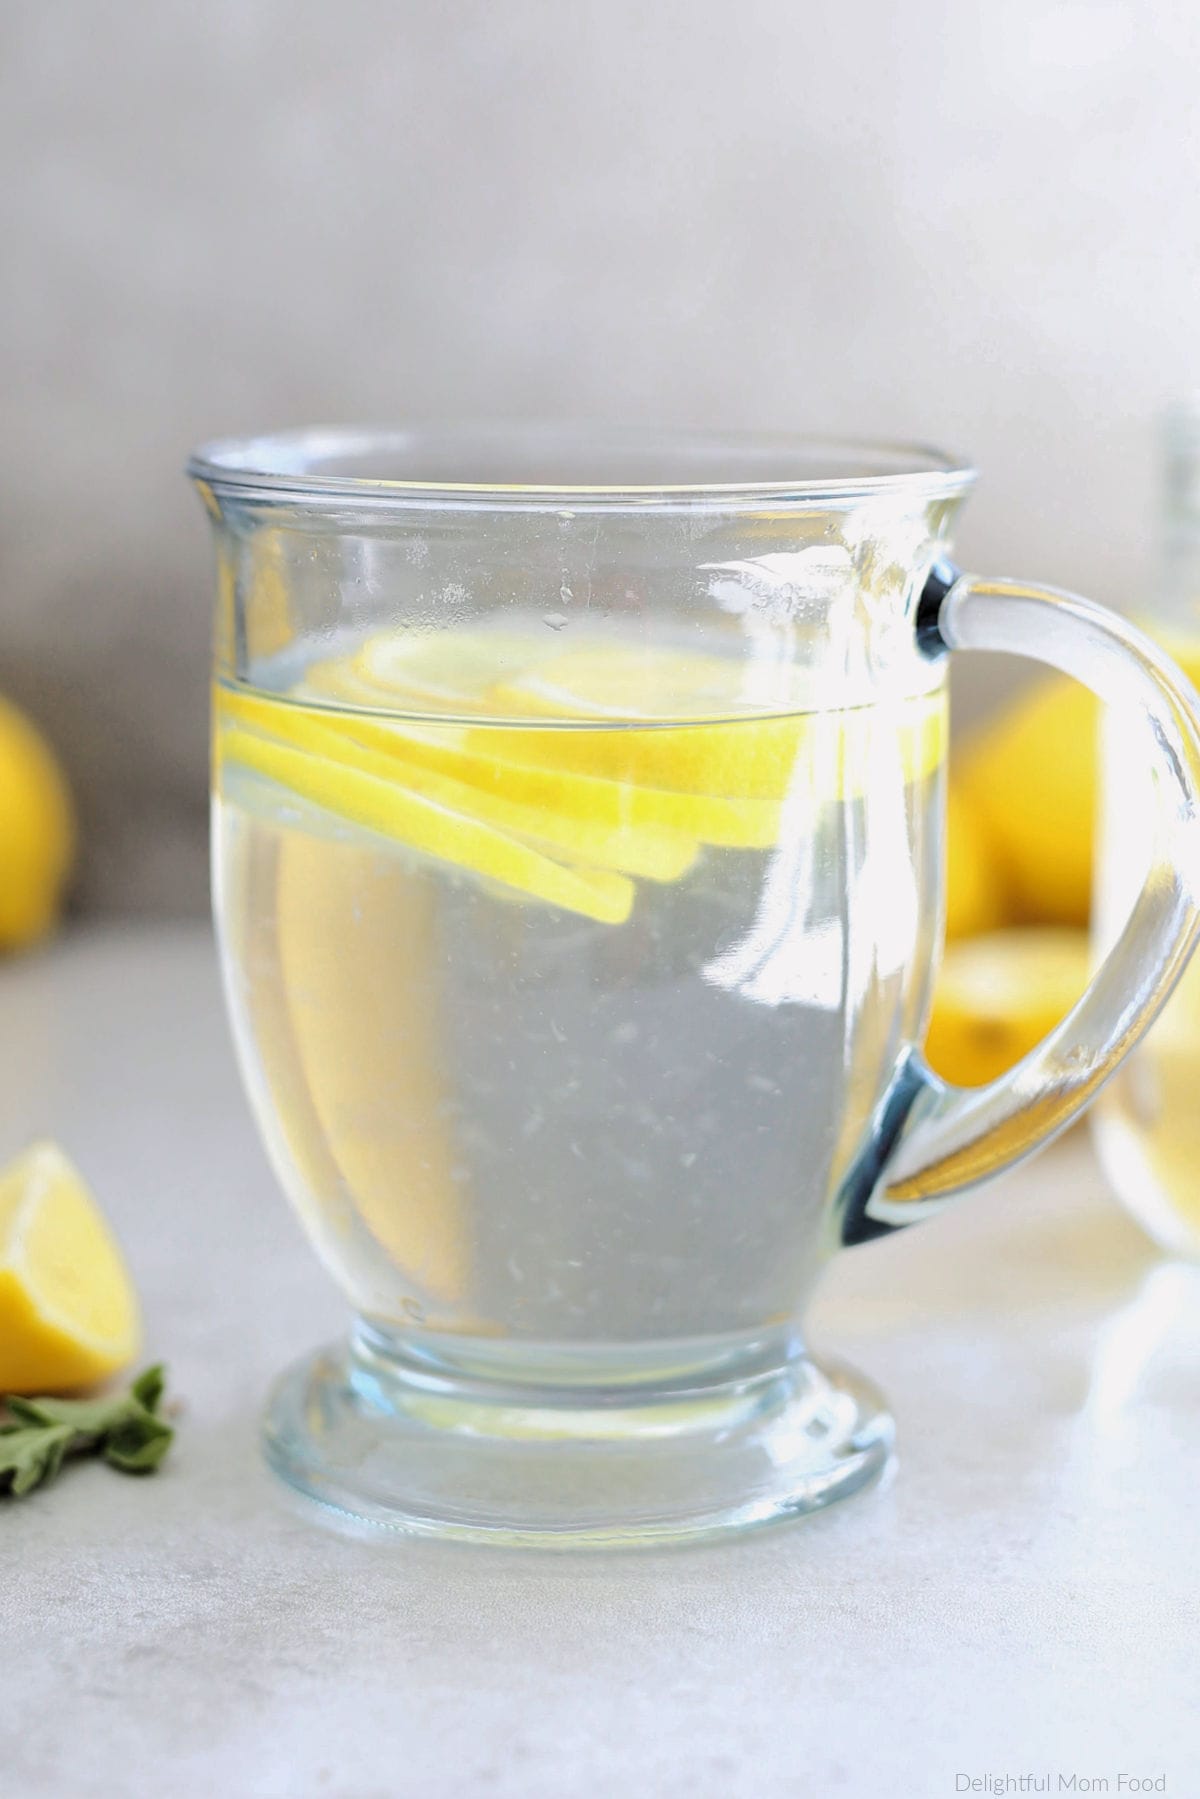 Mug with hot lemon water and citrus slices to absorb the benefits of lemon water.